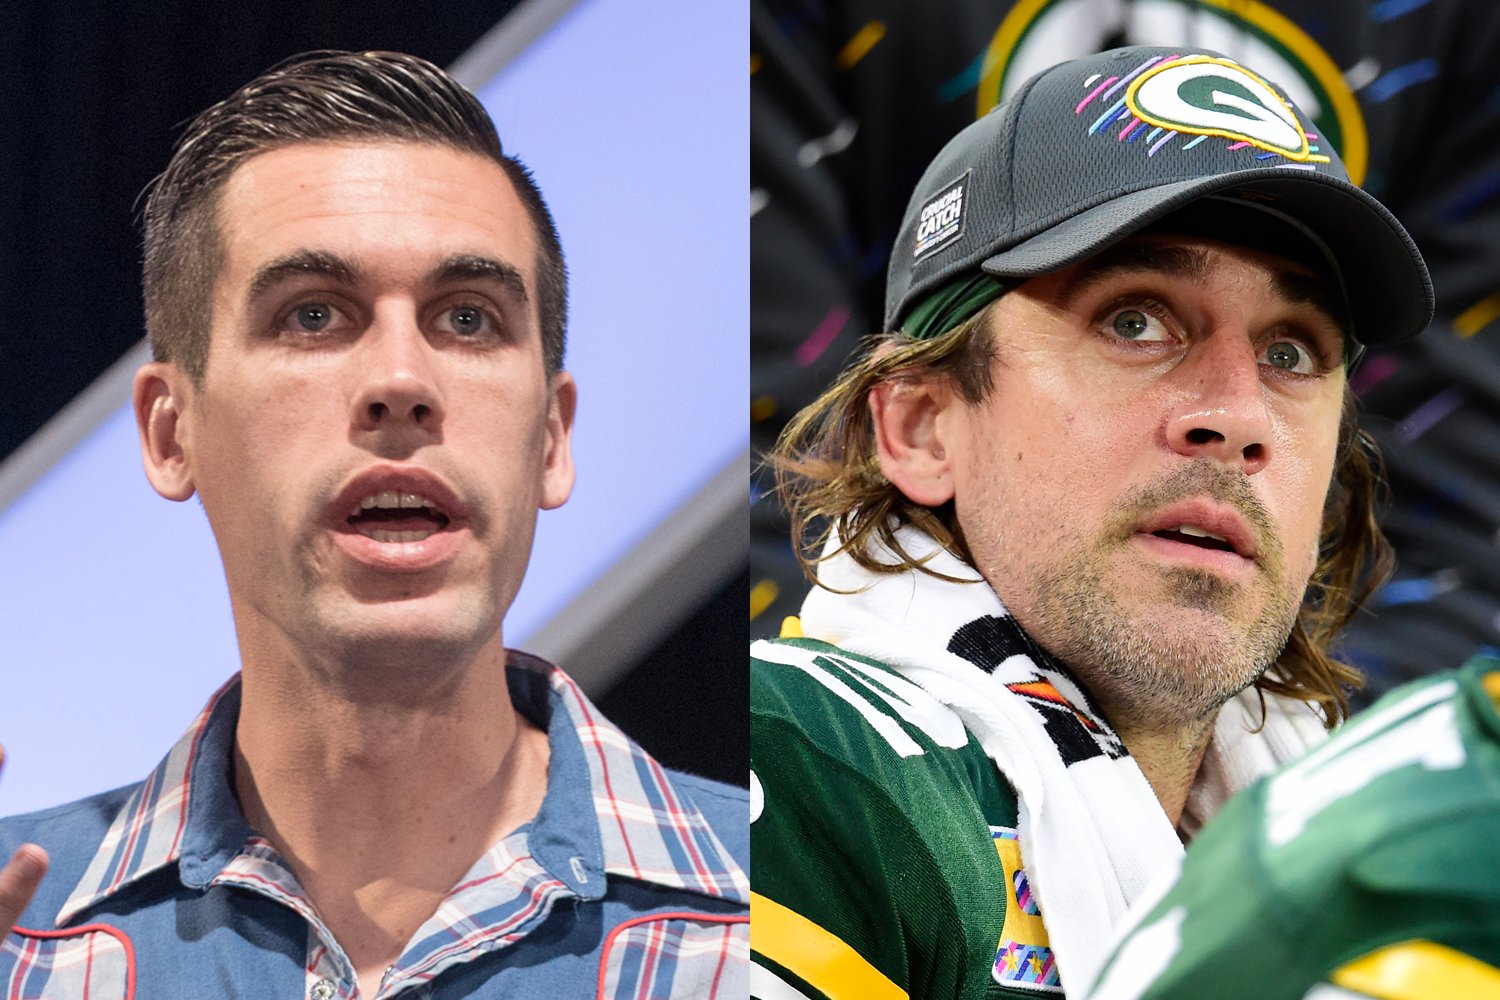 Aaron Rodgers Recommends 'The Daily Stoic' and Author Ryan Holiday Reacts  by Urging Others to Get COVID-19 Vaccine